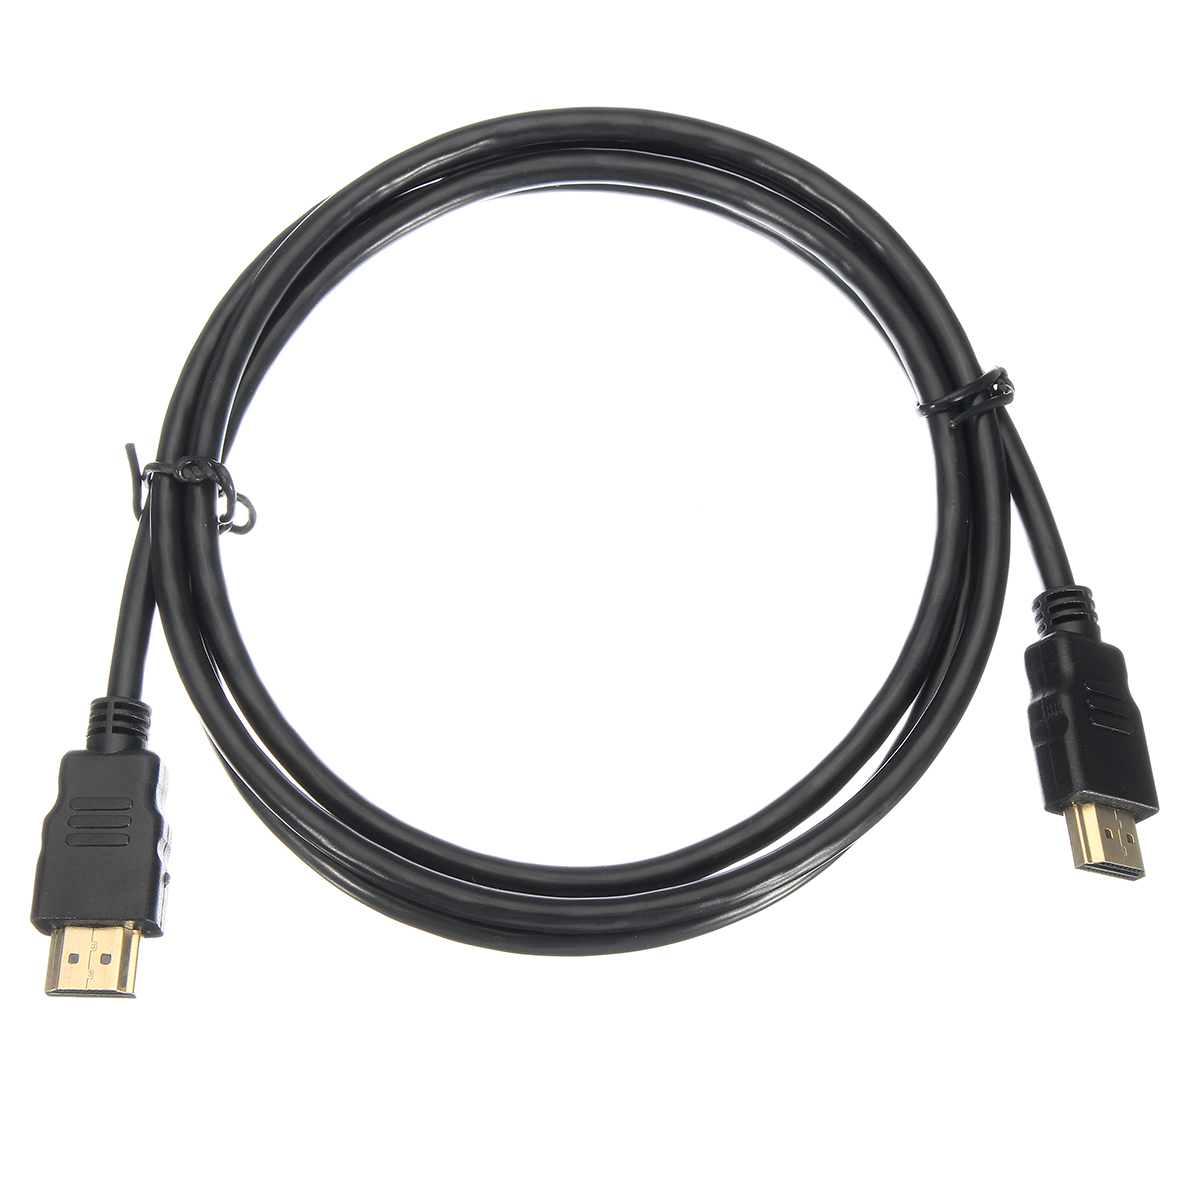 15M-High-Definition-Multimedia-Interface-Cable-Black-for-HDTV-XBox-Projectors-1225927-1